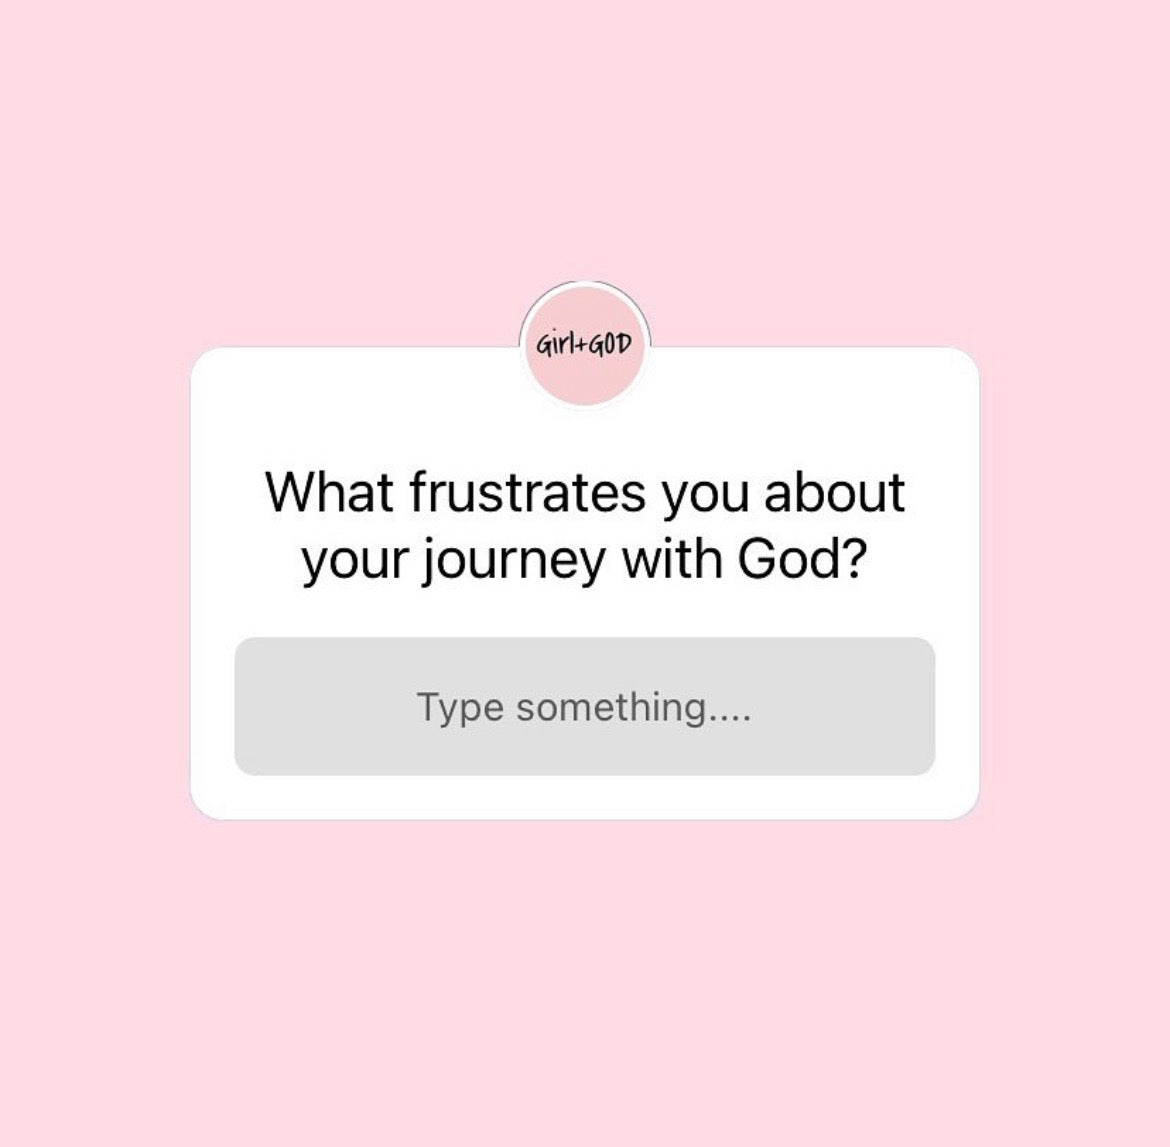 What frustrates you the MOST about your journey with God?